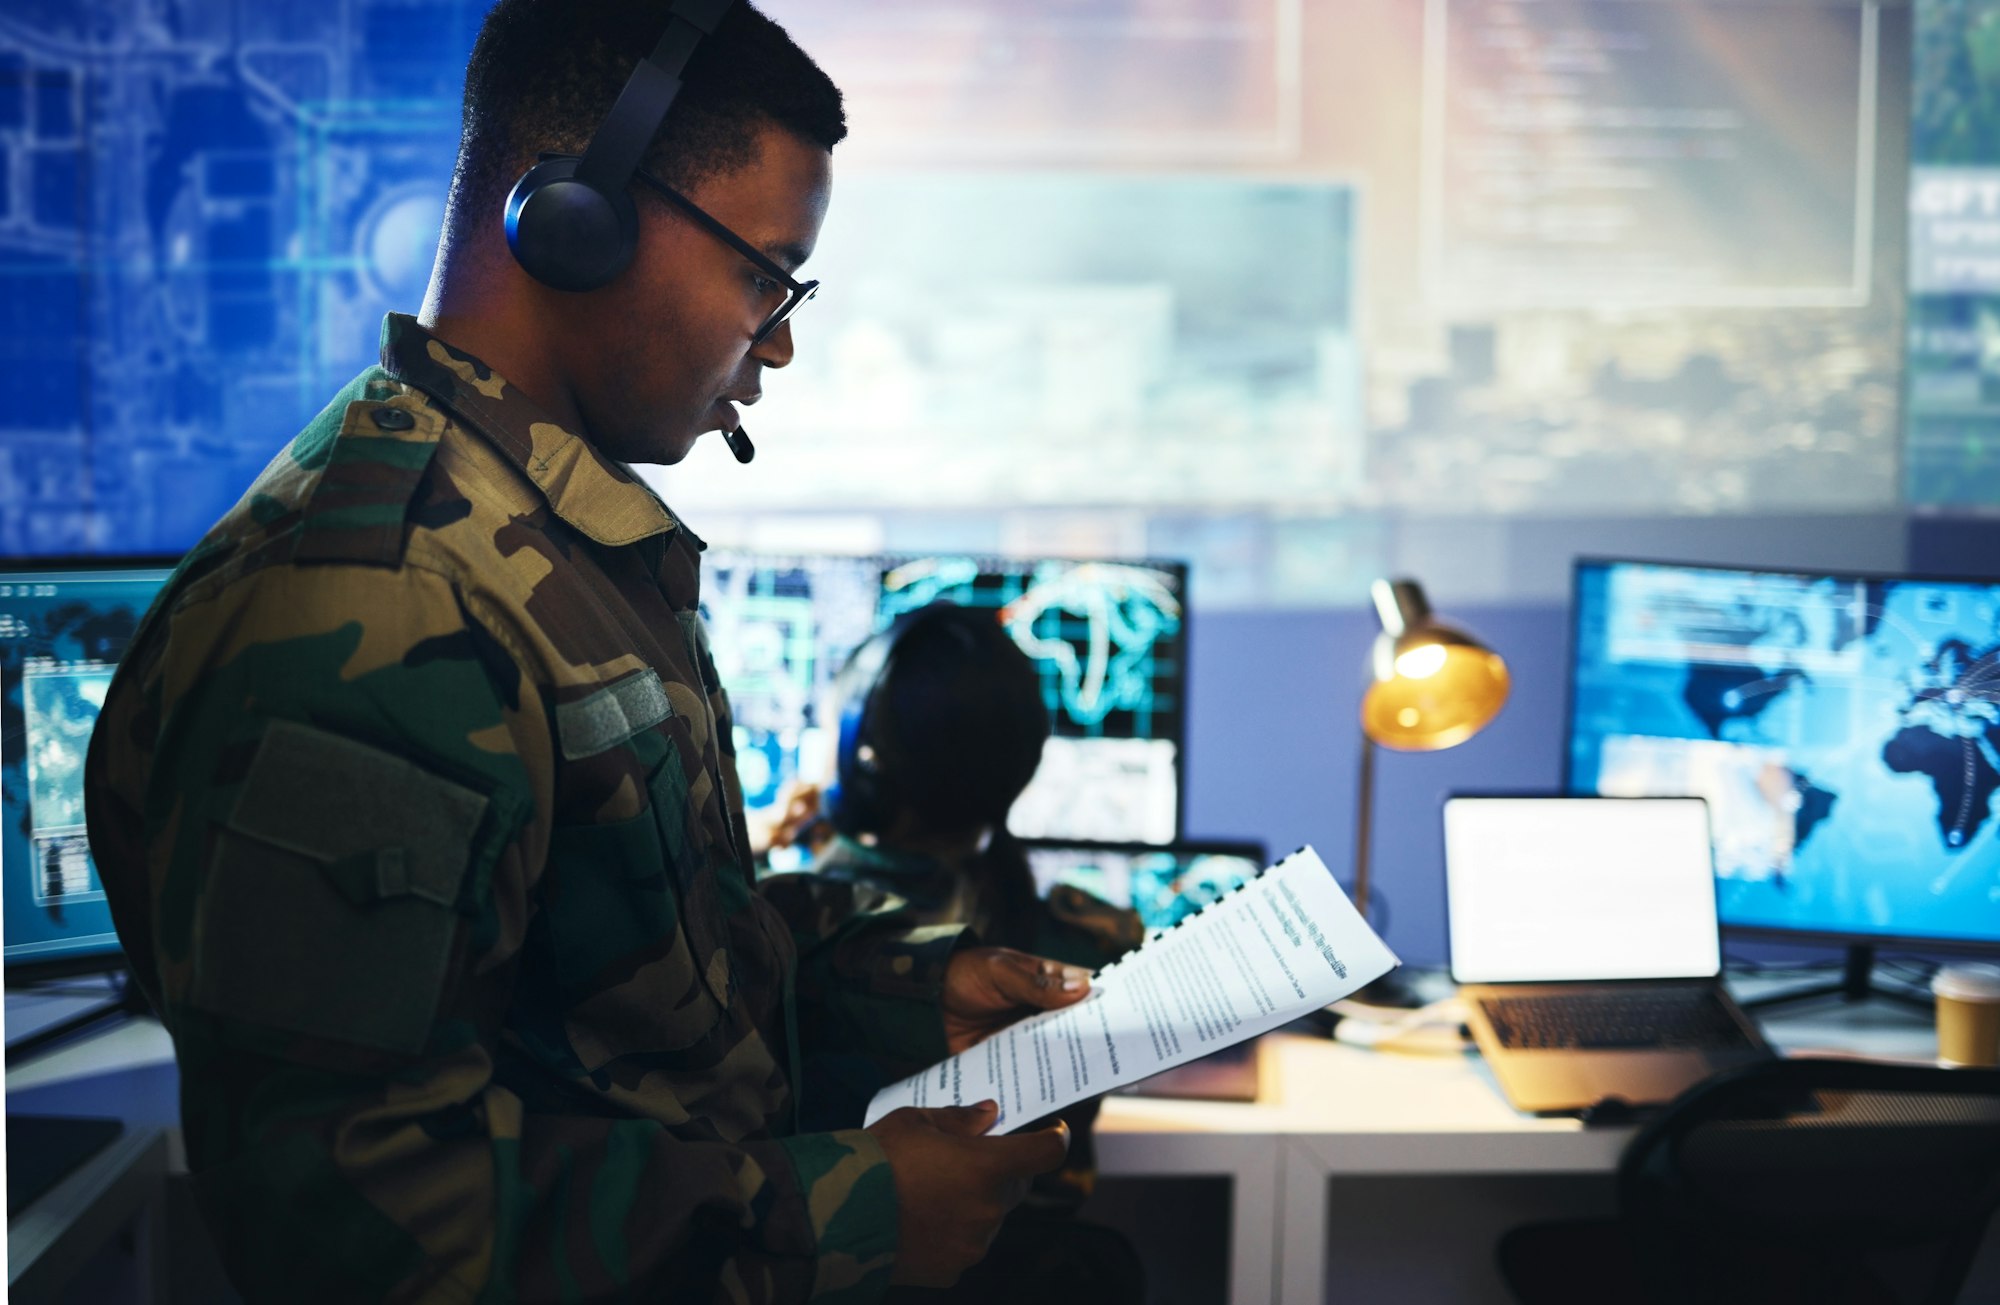 Control room, military documents and people on computer for surveillance, tracking operation and na